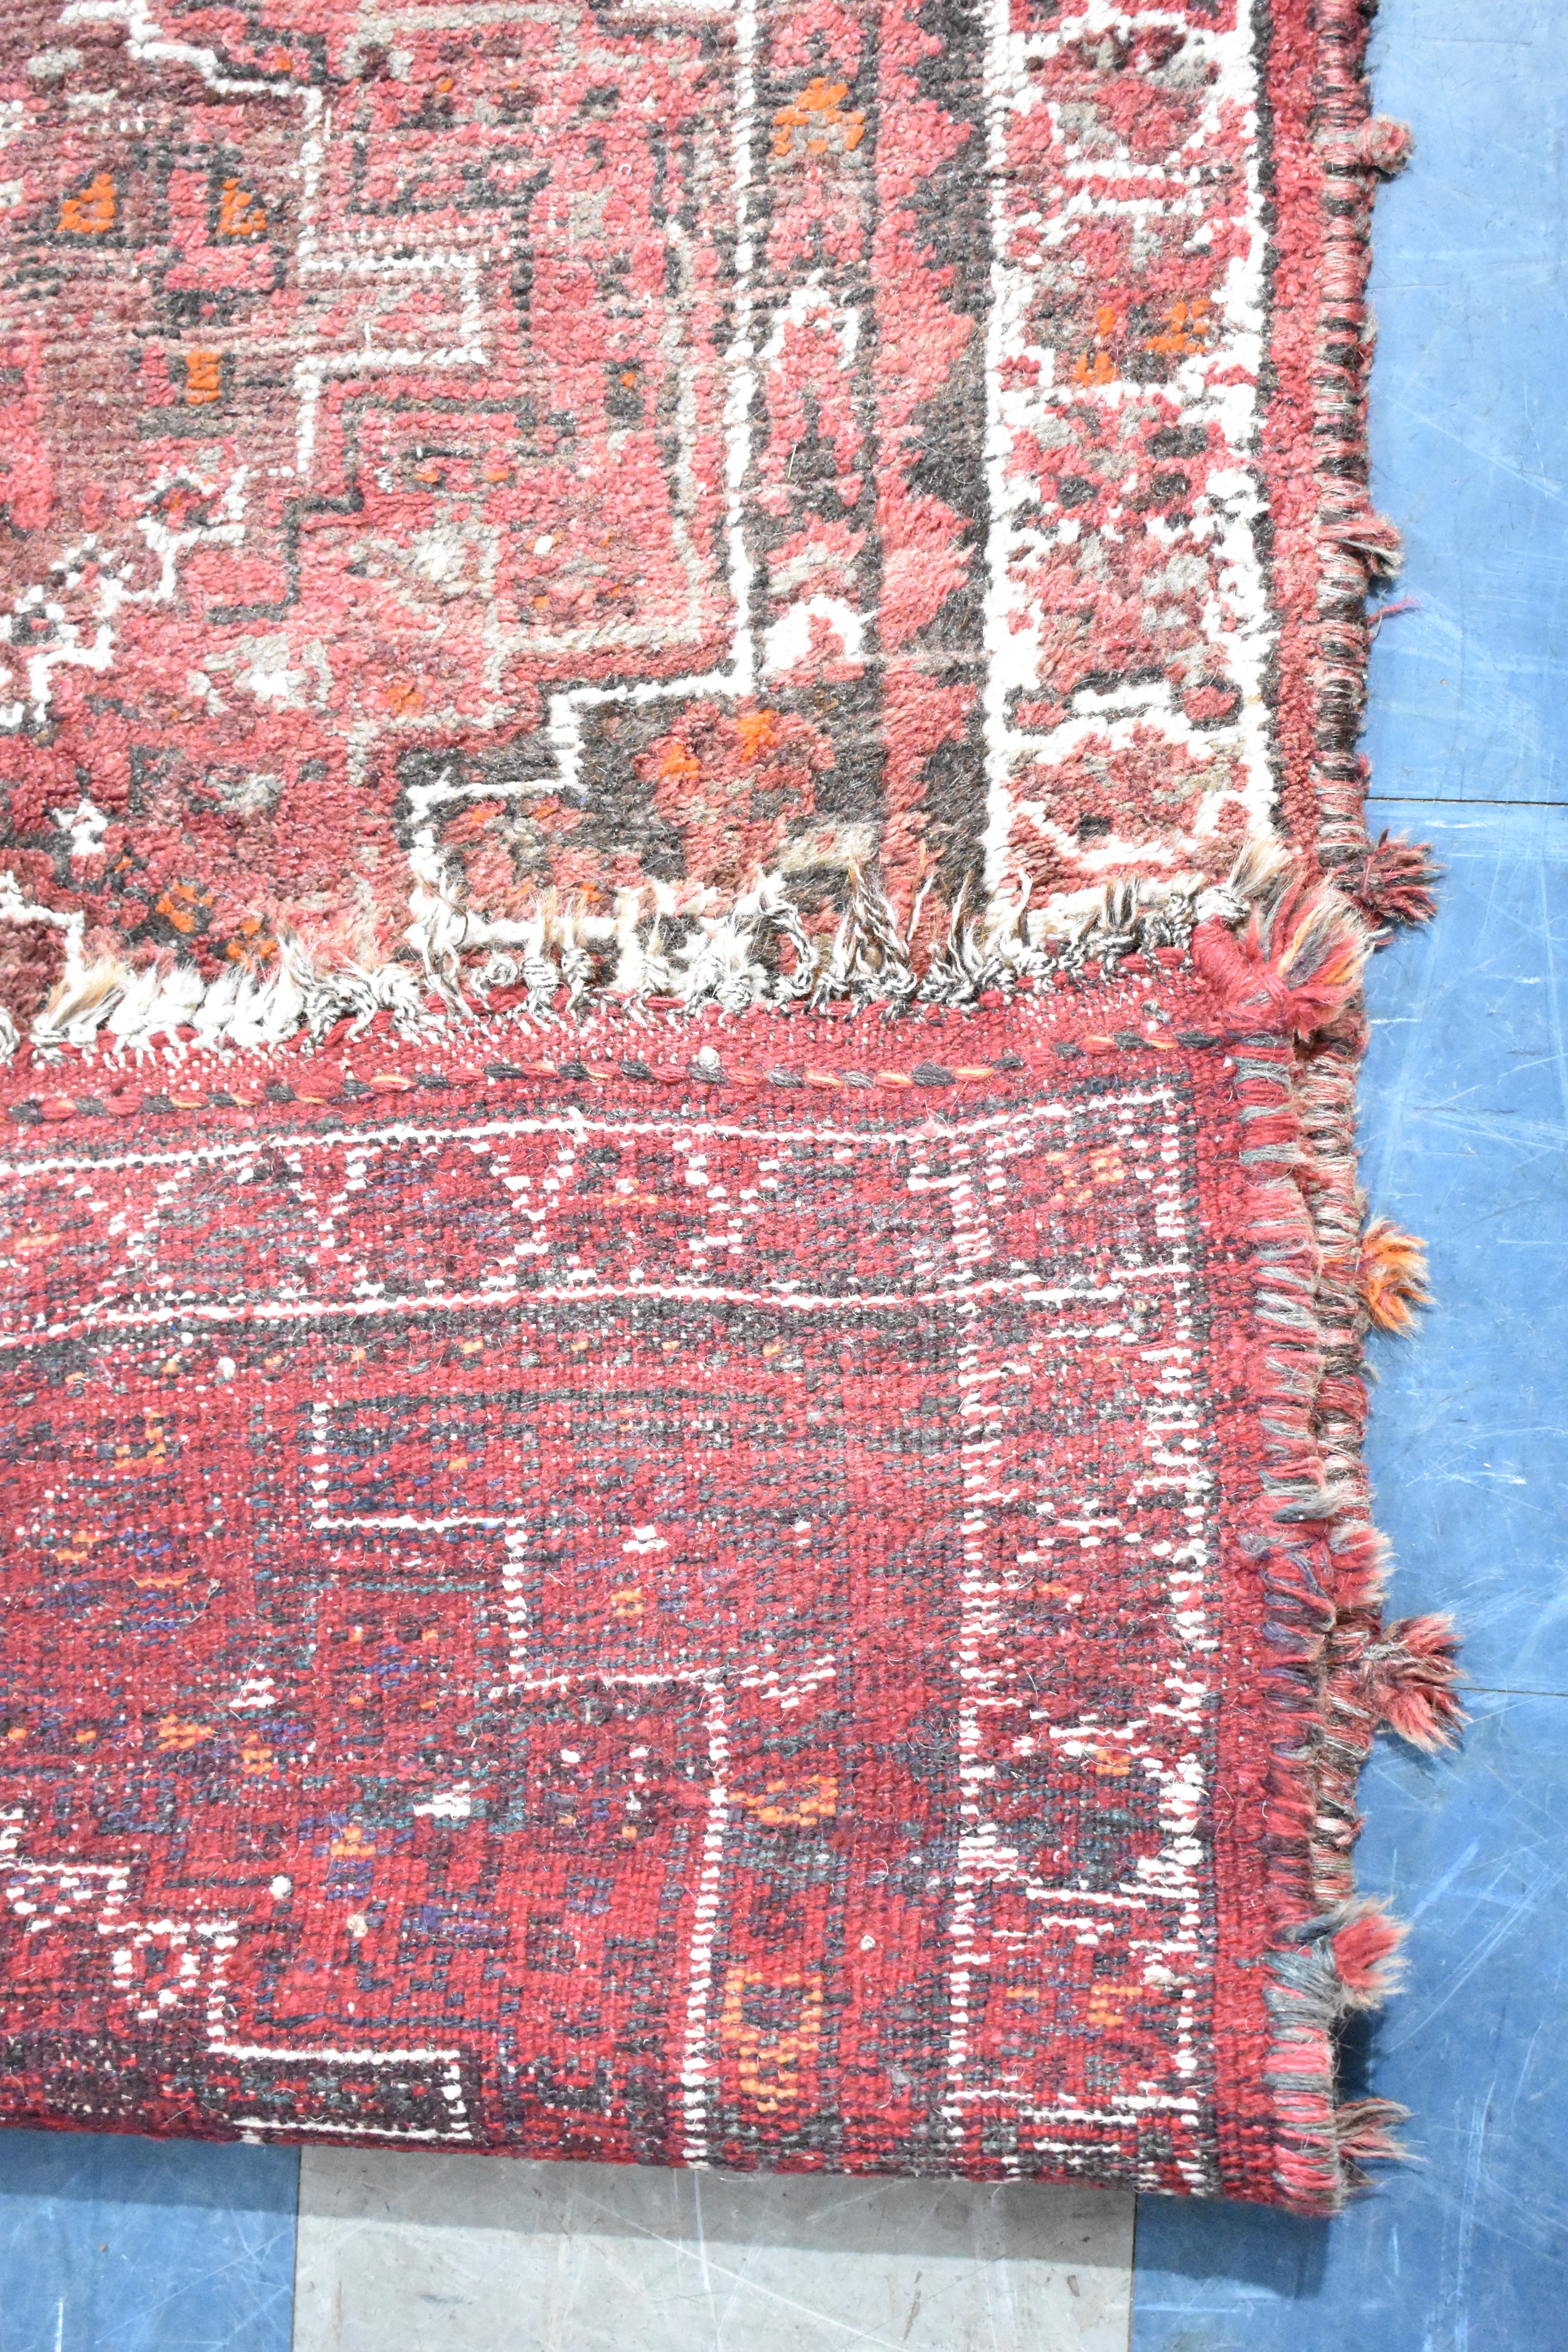 A Patterned Woolen Rug, Somewhat Worn, 157x114cms - Image 4 of 4